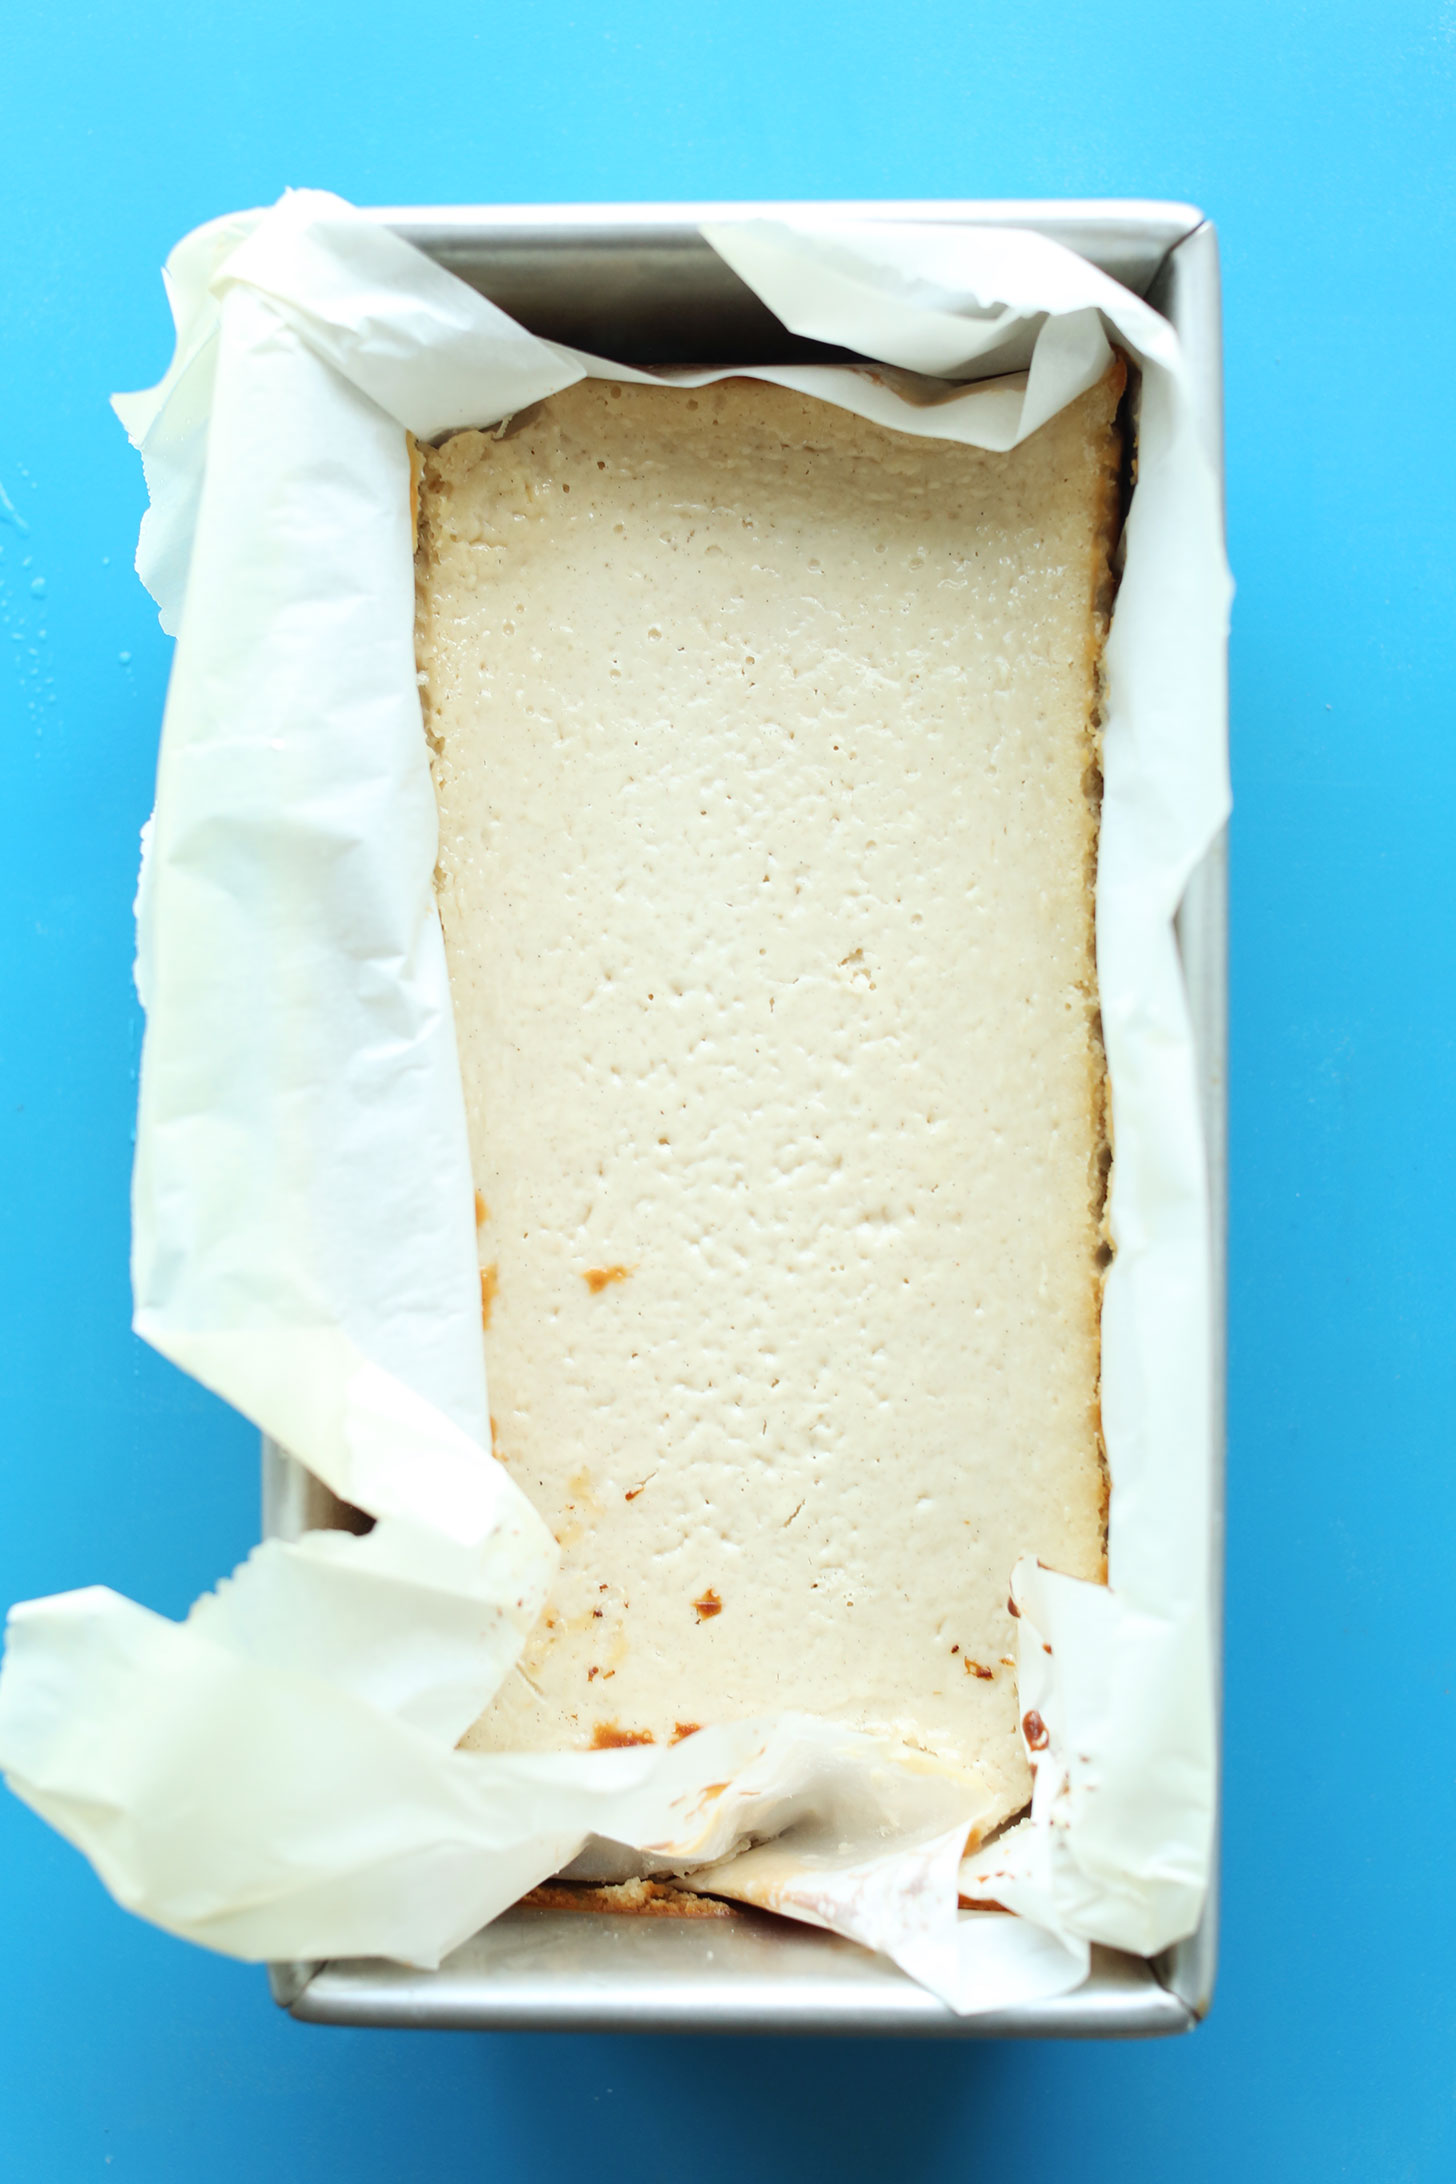 Parchment-lined bread pan with our gluten-free vegan Baked Cheesecake